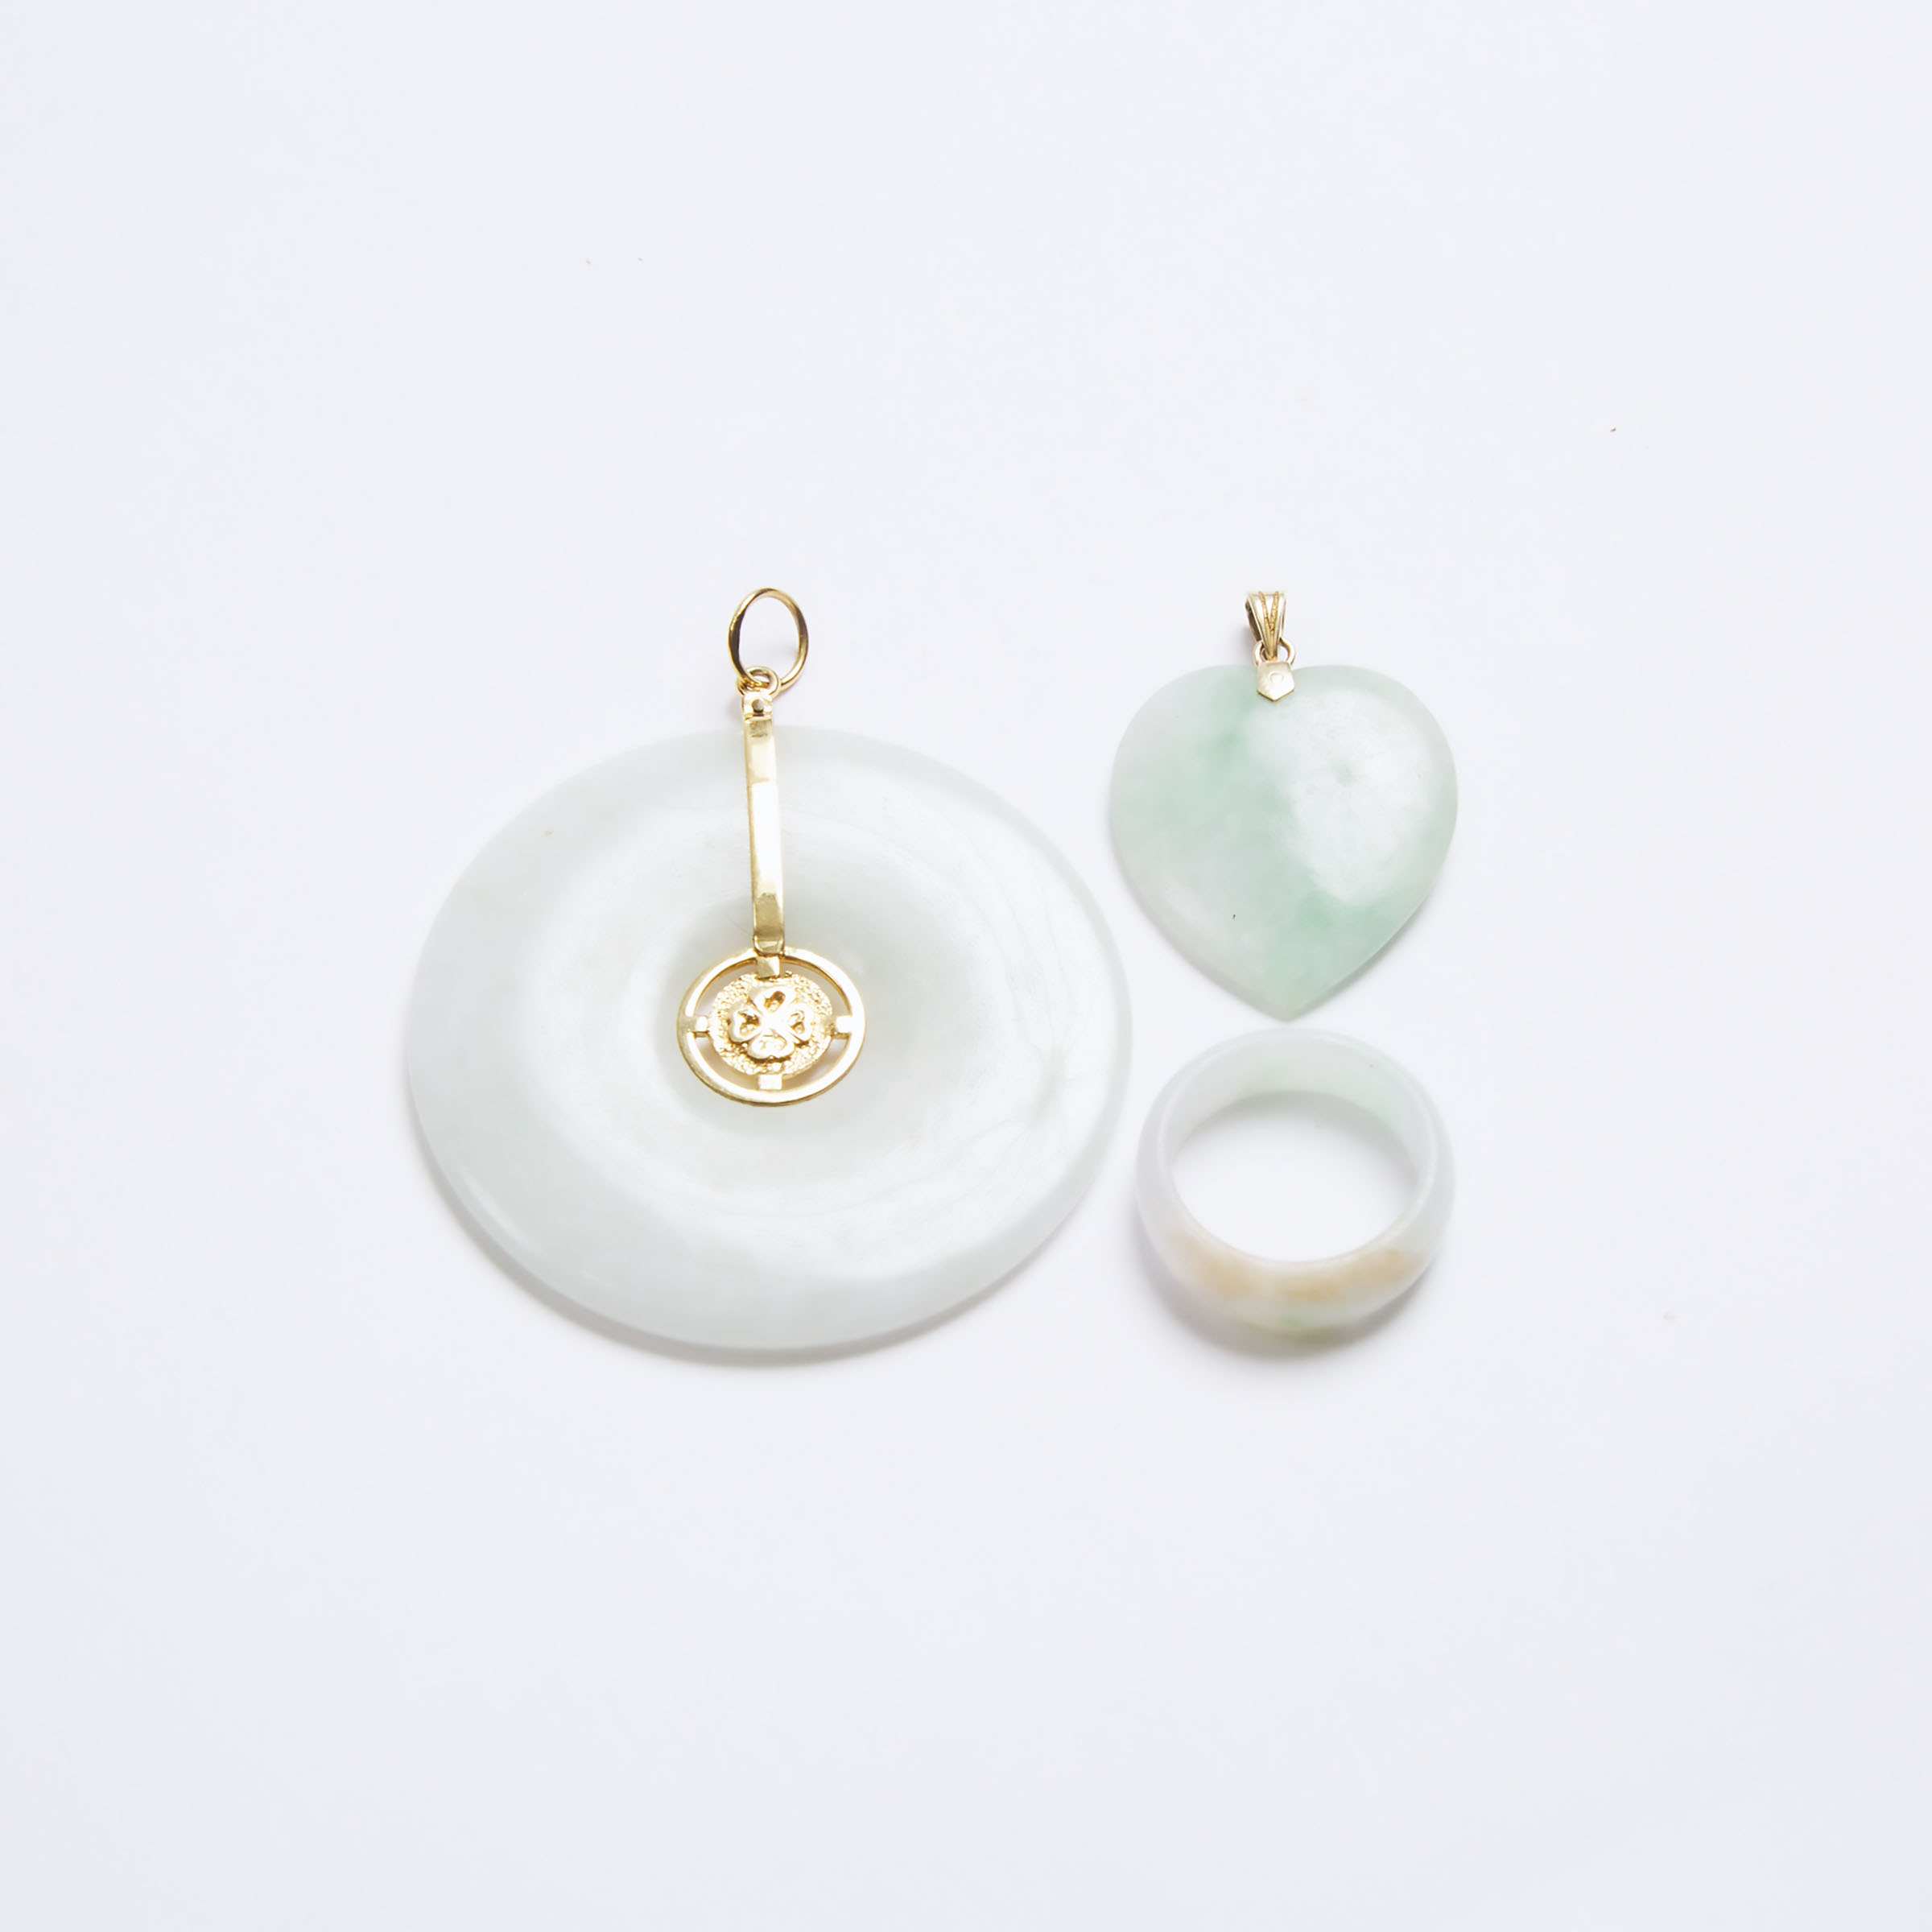 A Group of Three Natural Jadeite Jewellery, Early to Mid 20th Century